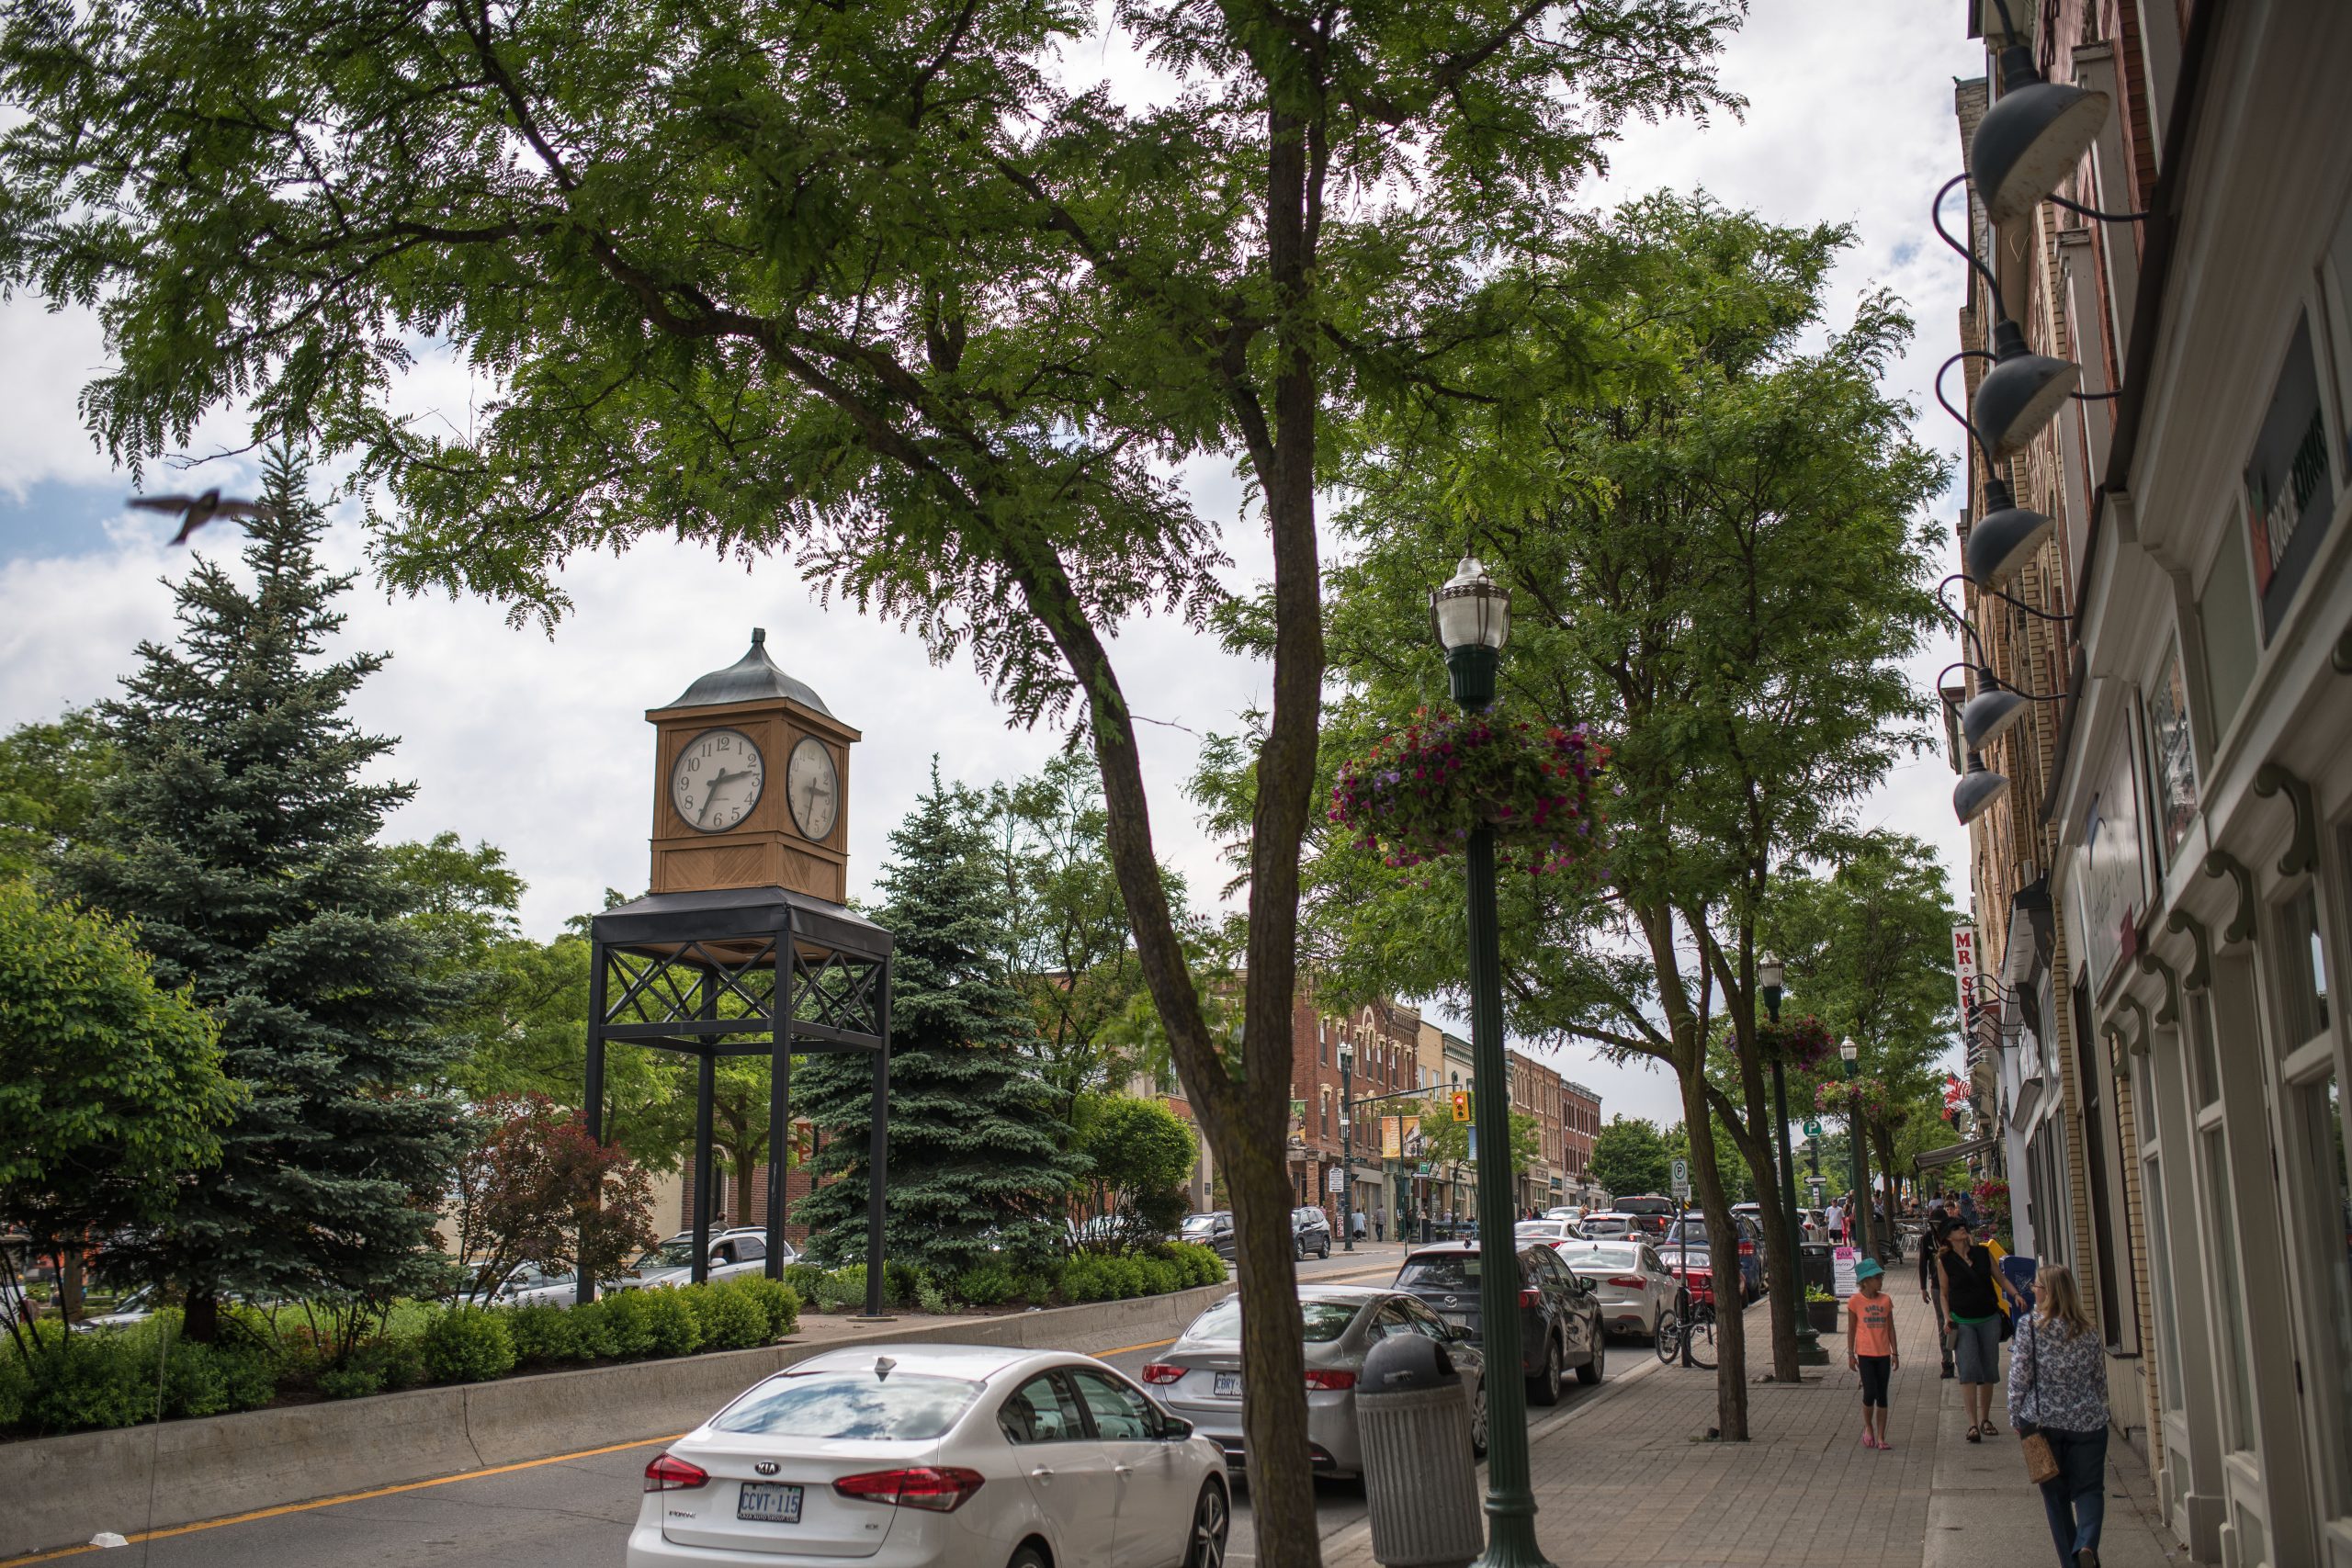 Image of downtown Orangeville with trees and cars.